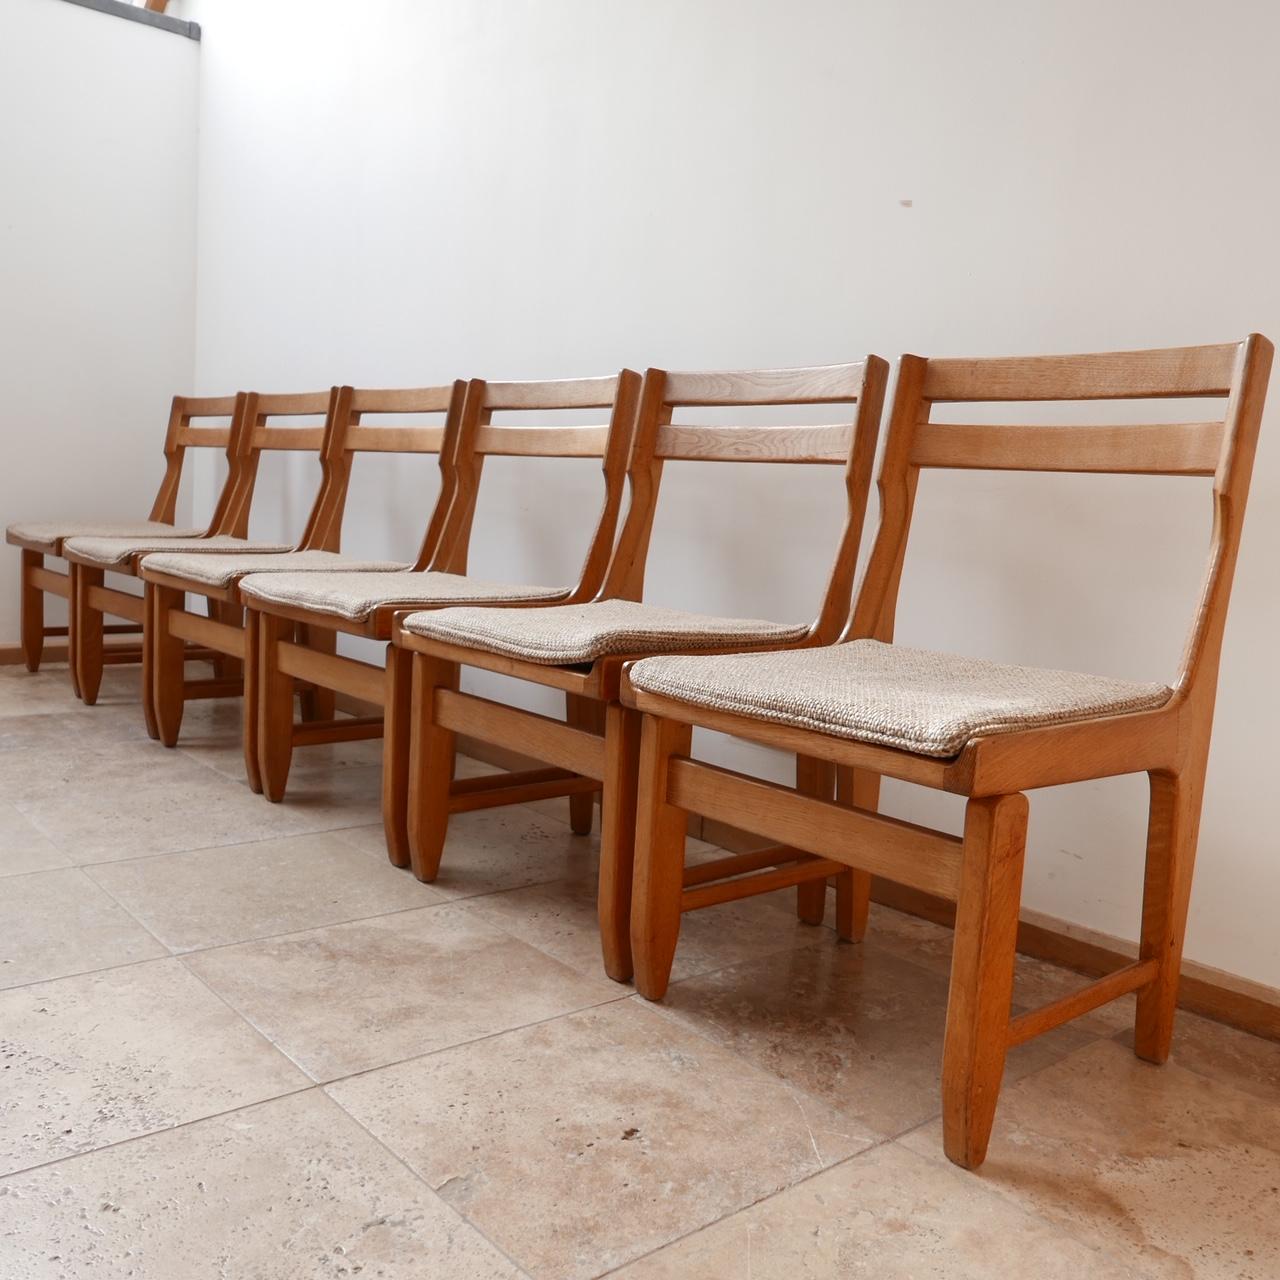 A good run of six oak dining chairs by French design legends Guillerme et Chambron,

France, c1960s. 

Original upholstery remains but wants updating. 

Good condition, some scuffs and wear commensurate with age. 

Dimensions: 49 W x 48 D x